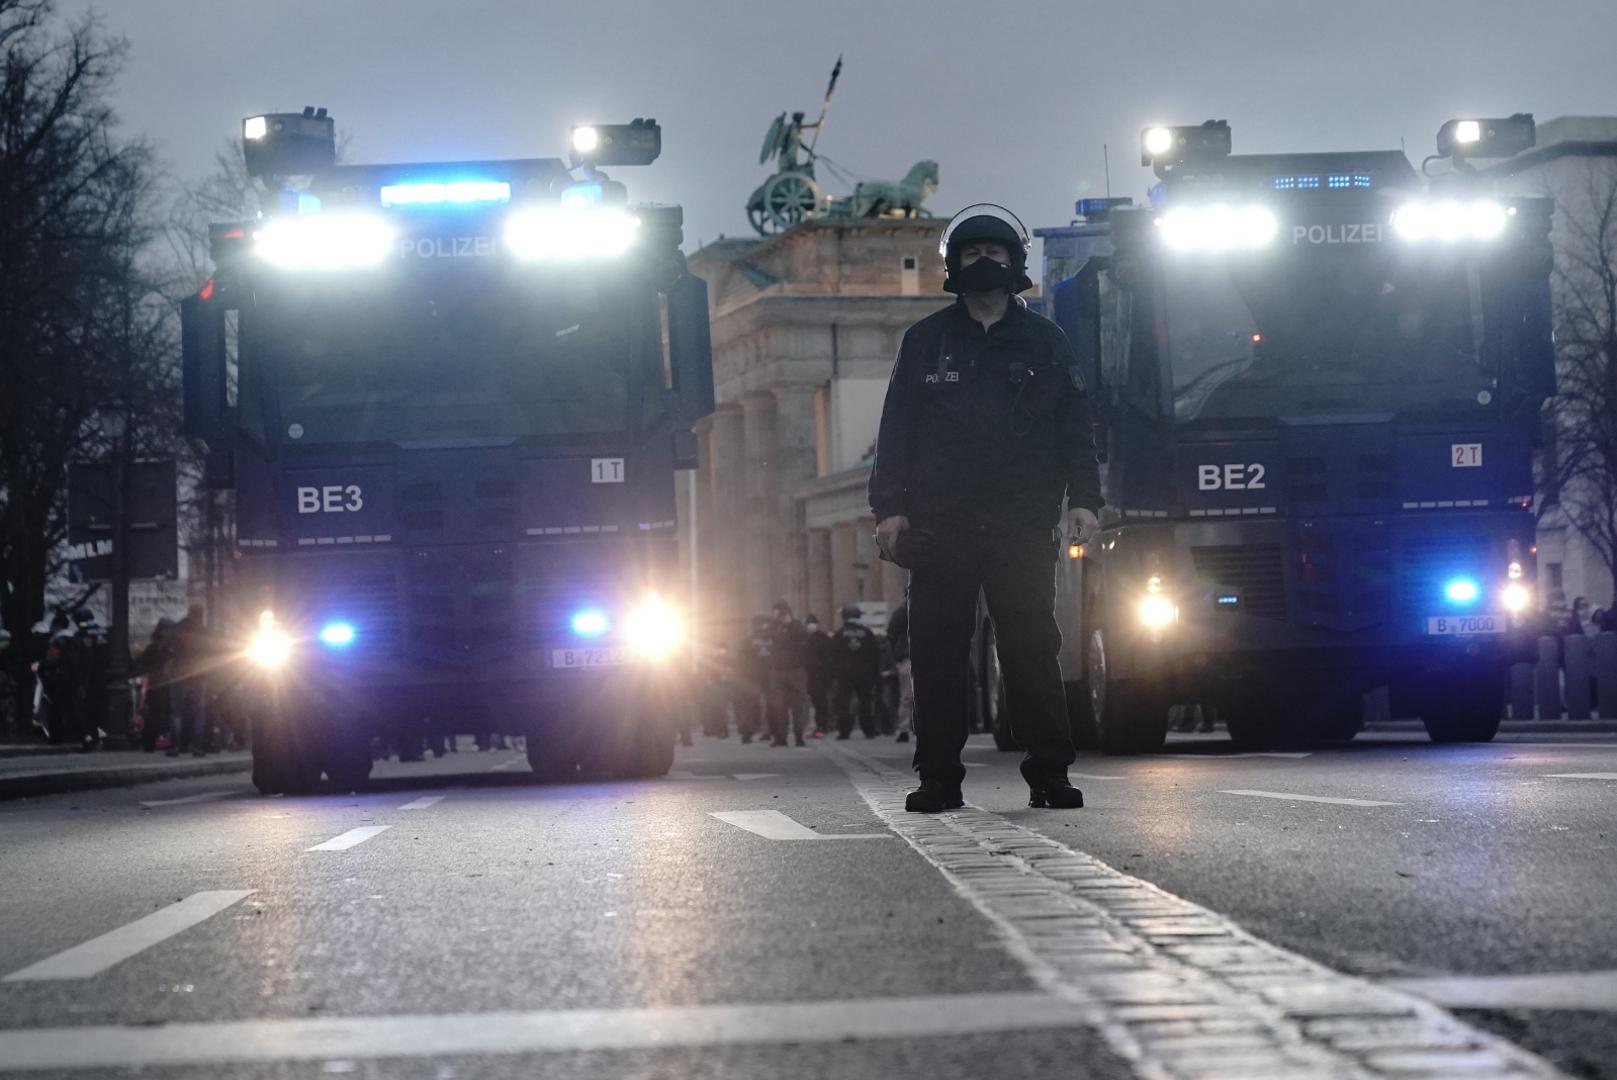 dpatop - 18 November 2020, Berlin: Police water cannons stand at the Brandenburg Gate during a demonstration against the corona restrictions of the federal government. At the same time, the new version of the infection protection law is to go through the Bundestag and Bundesrat in a fast-track procedure. Photo: Michael Kappeler/dpa /DPA/PIXSELL